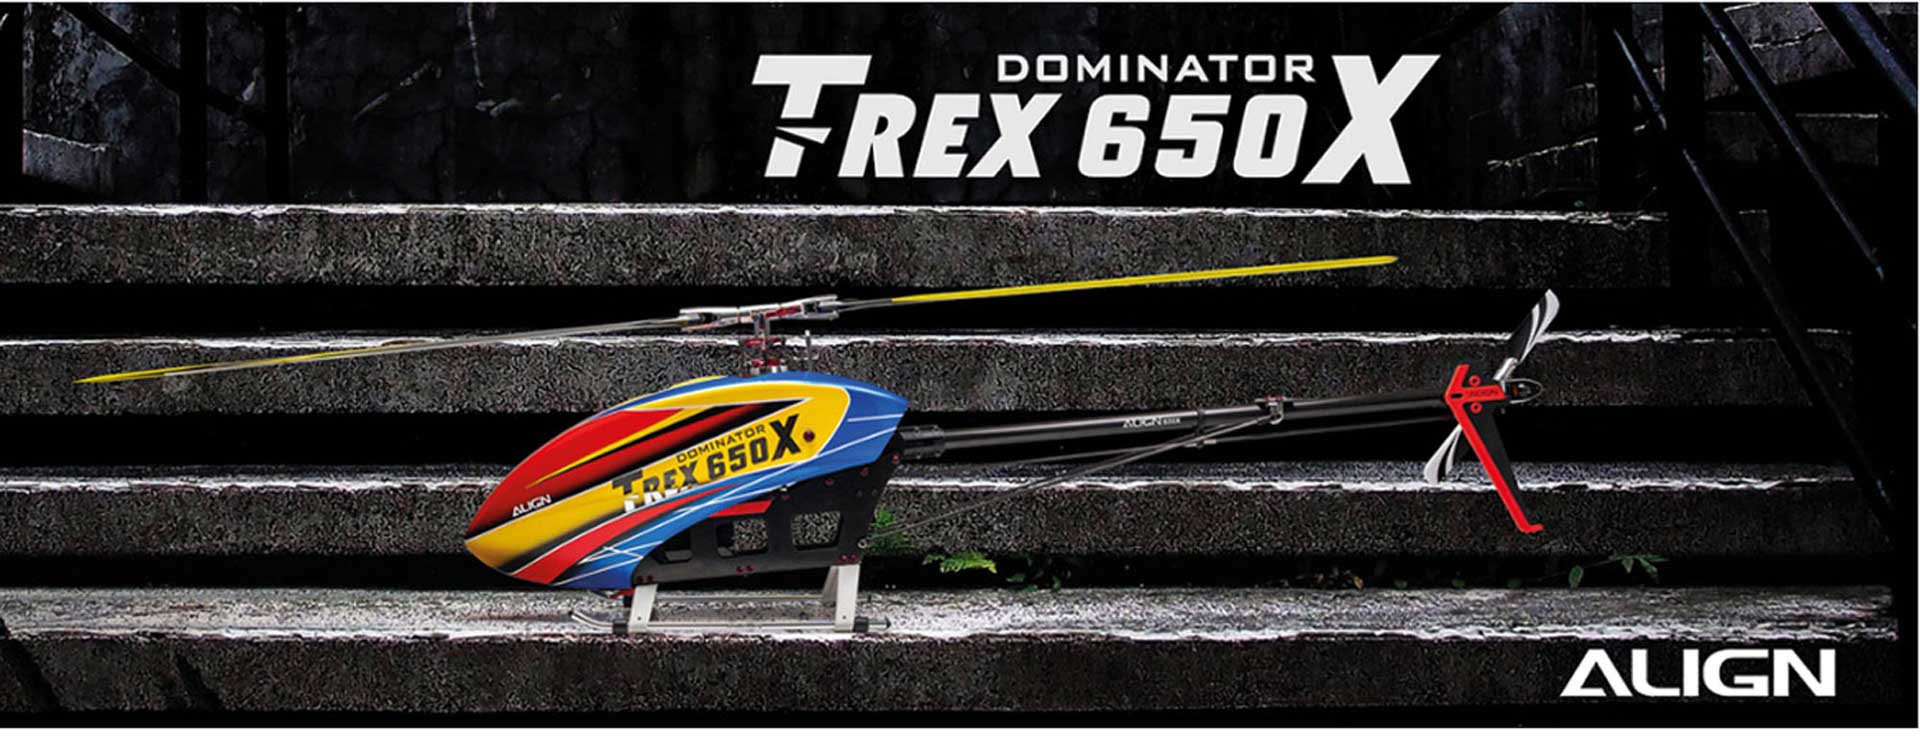 ALIGN T-REX 650X Dominator Combo (12S) Hélicoptères RC